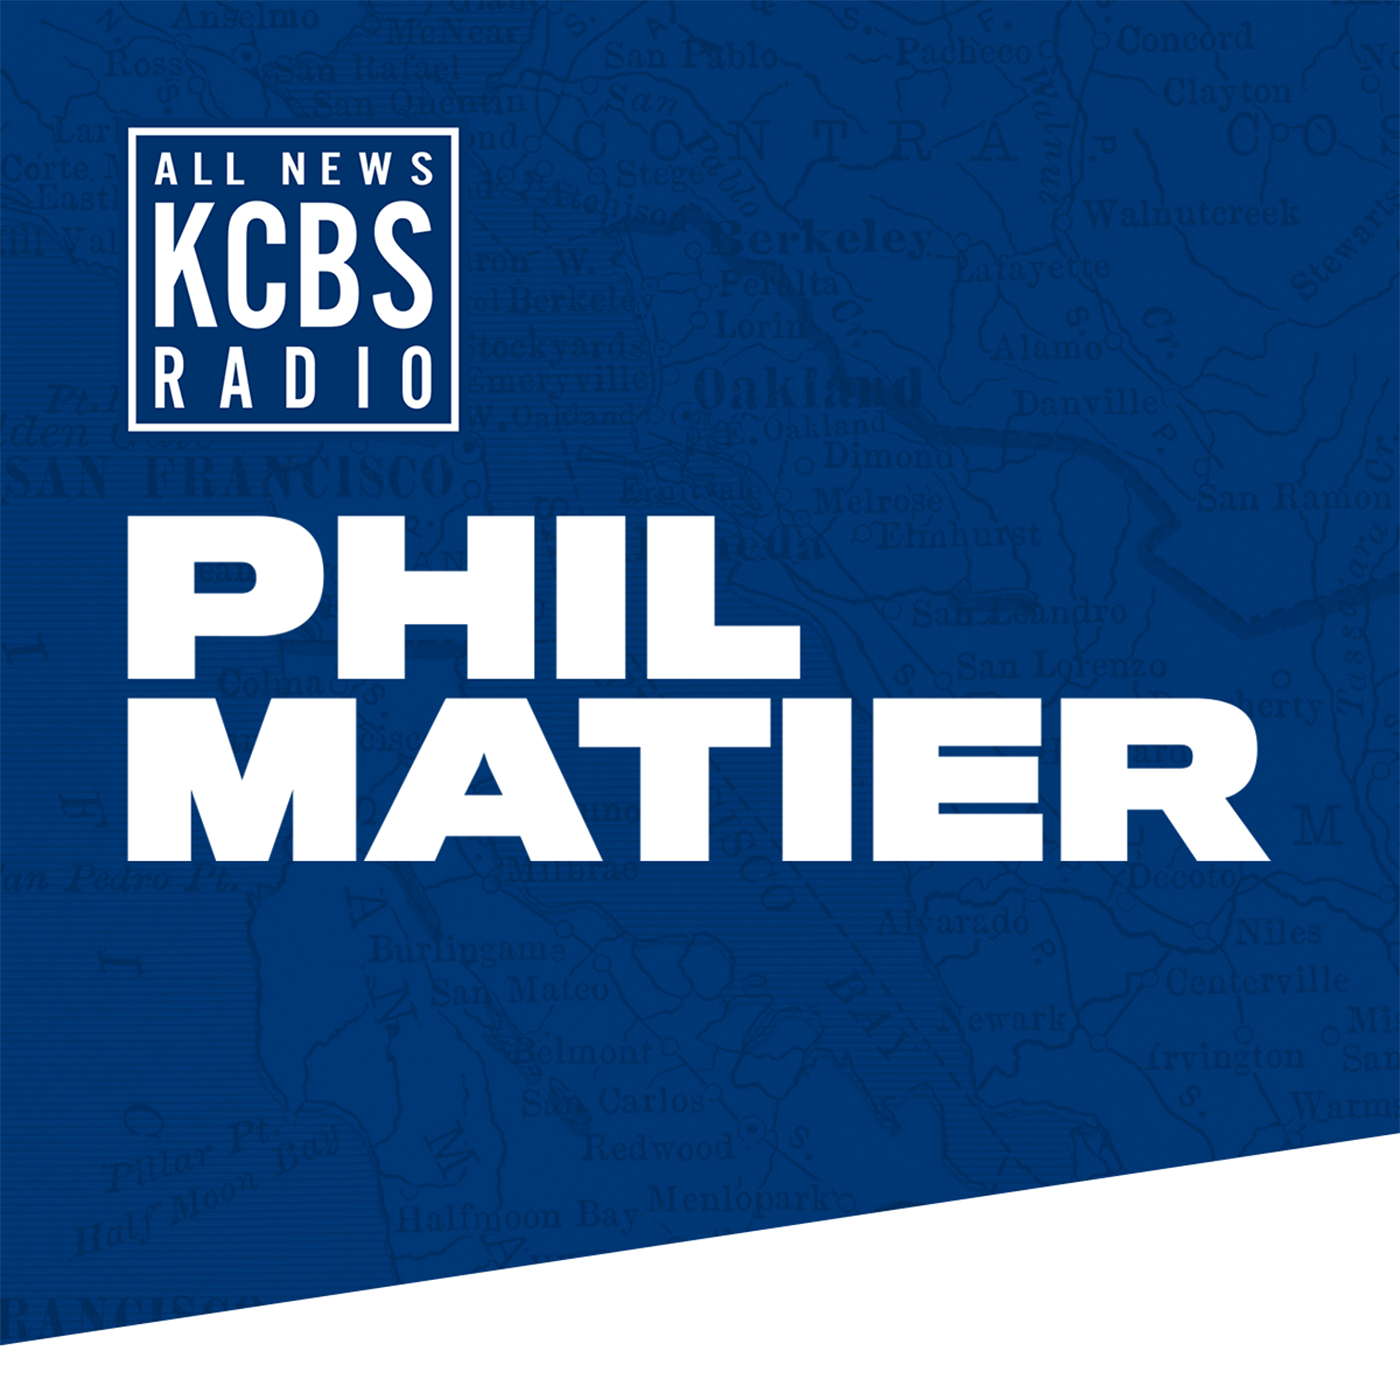 Phil Matier: Are Larry Edler's comments working in favor towards Newsom's campaign?